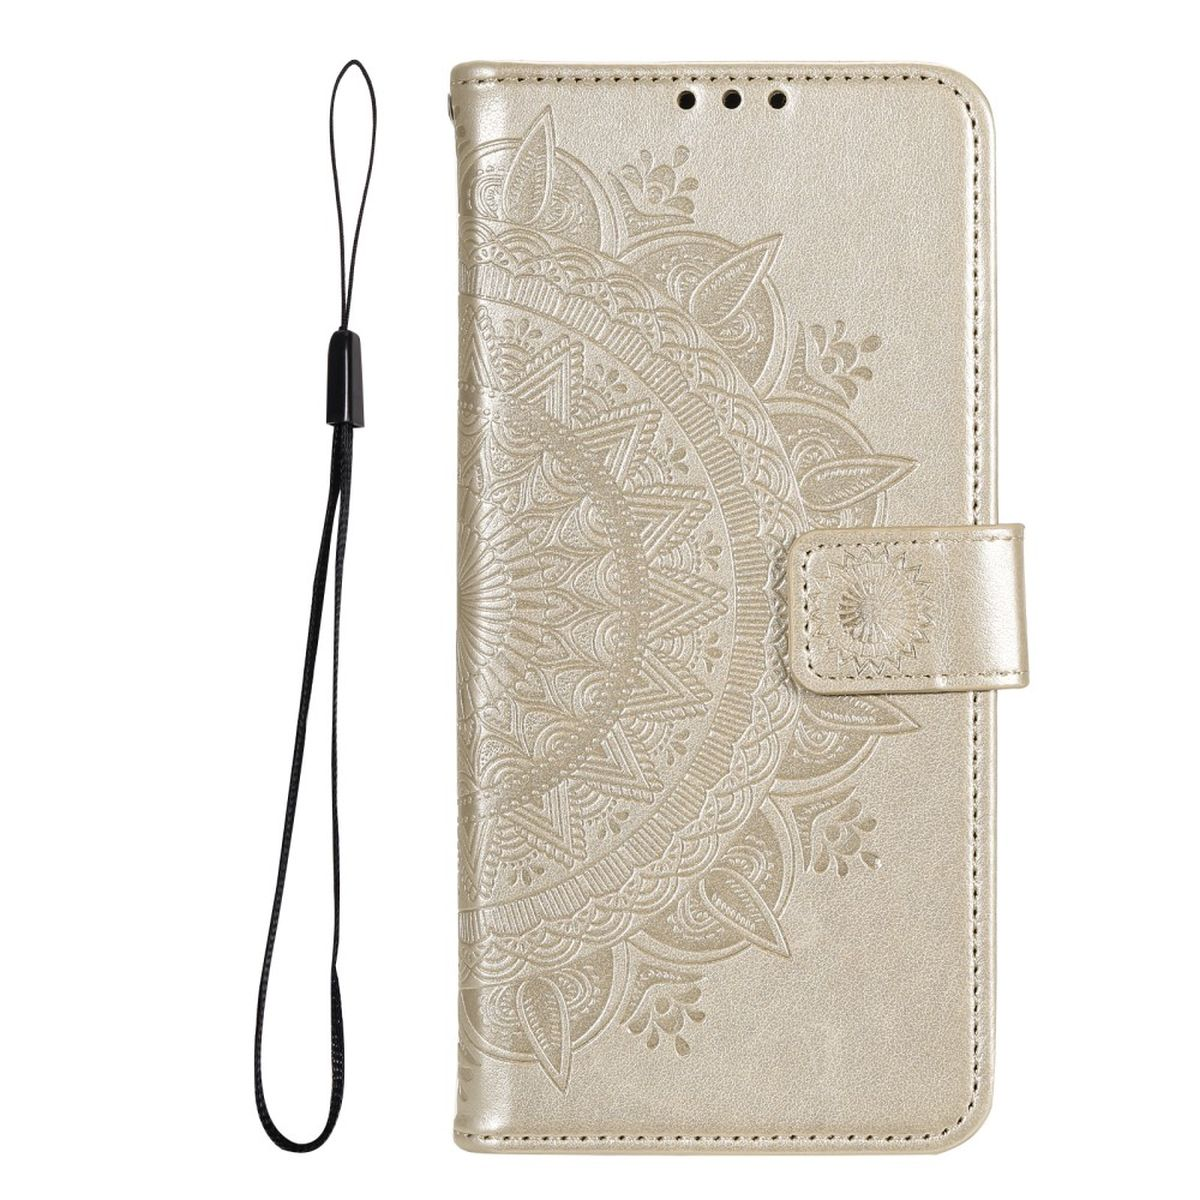 COVERKINGZ Klapphülle mit Galaxy Samsung, 5G, Muster, Mandala Bookcover, Gold A73